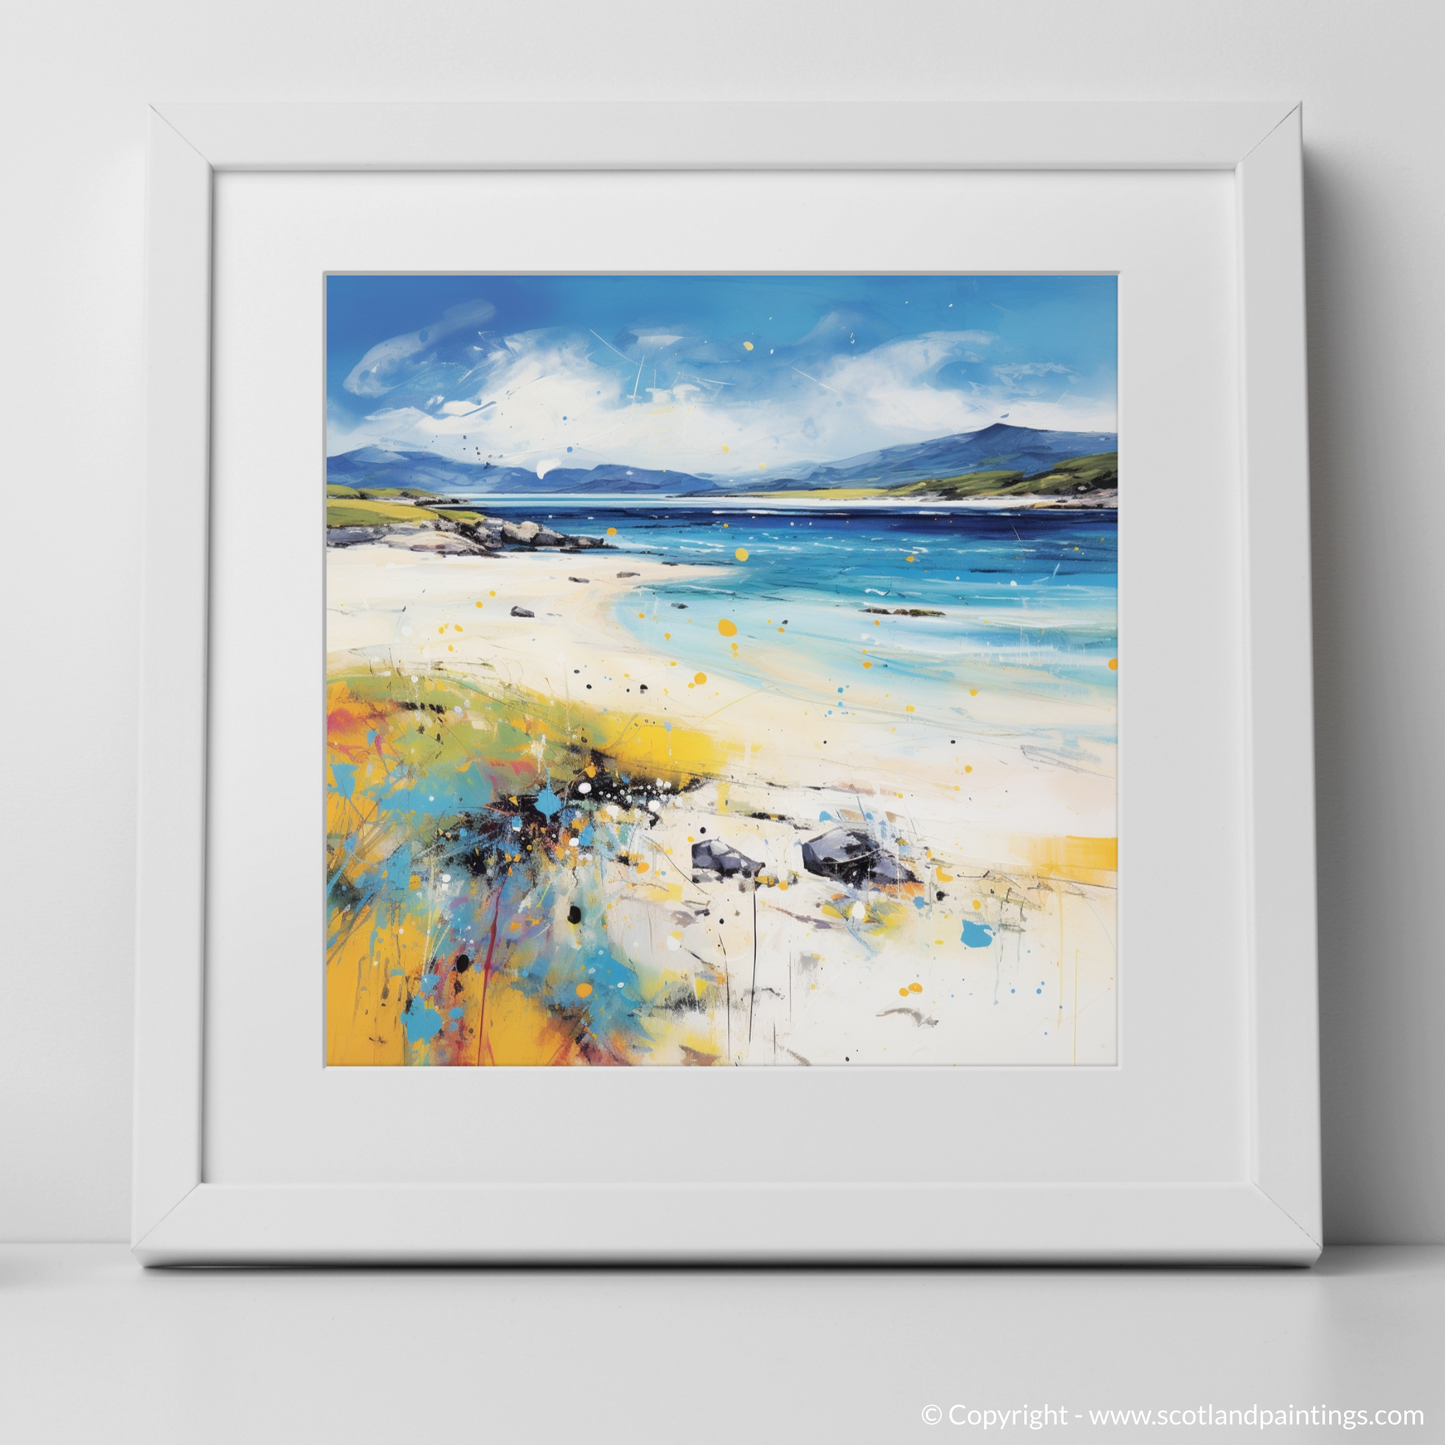 Art Print of Scarista Beach, Isle of Harris in summer with a white frame